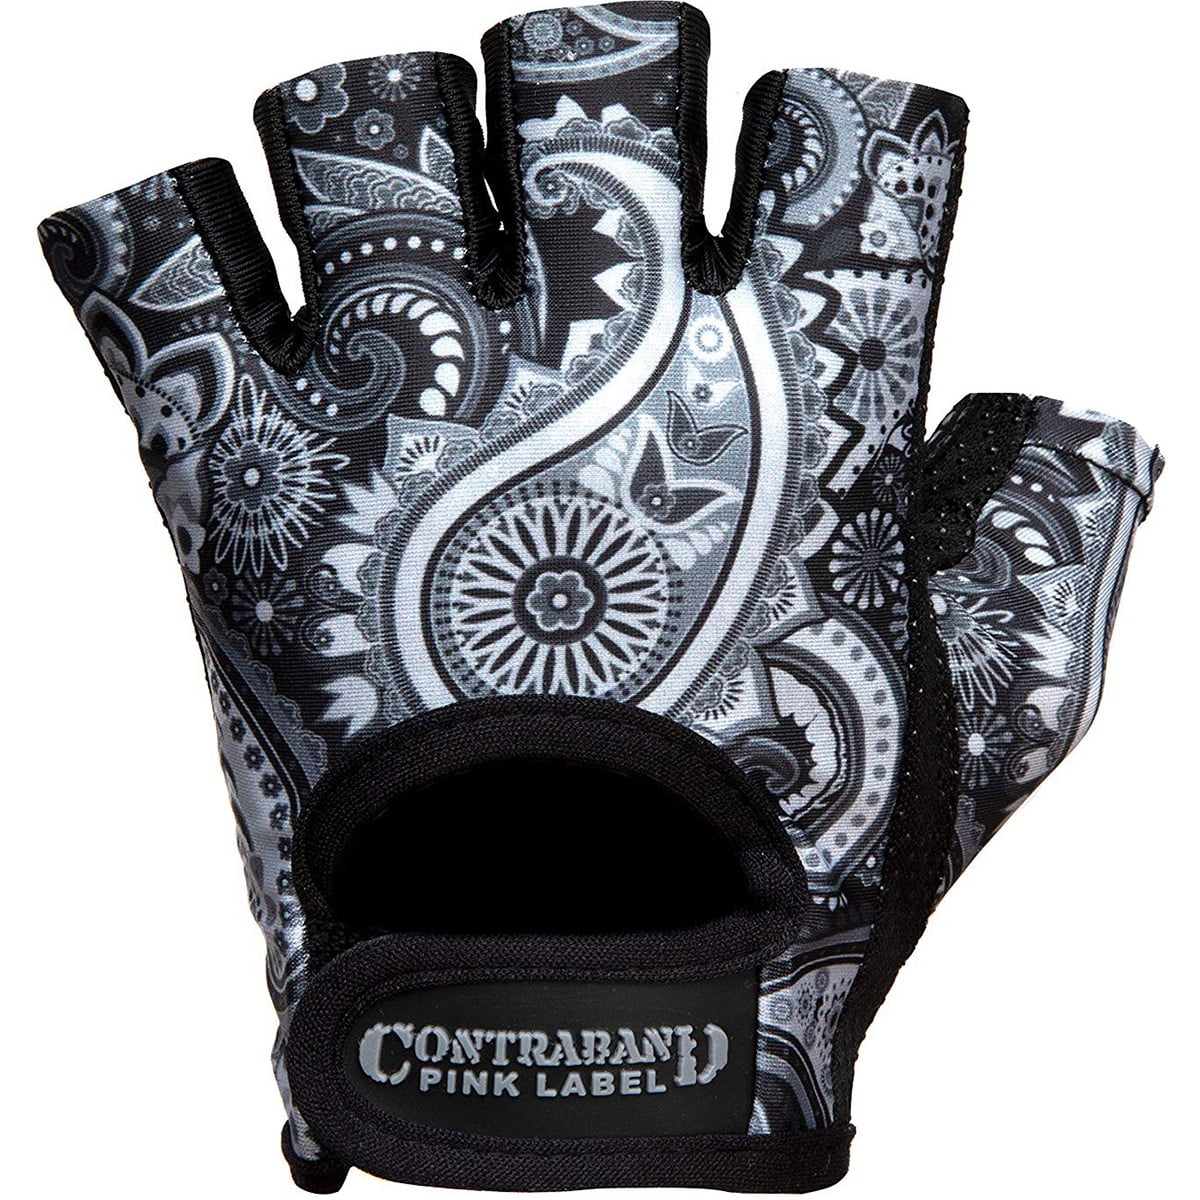 Contraband Sports 5237 Pink Label Sugar Skull Weight Lifting Gloves Pink 